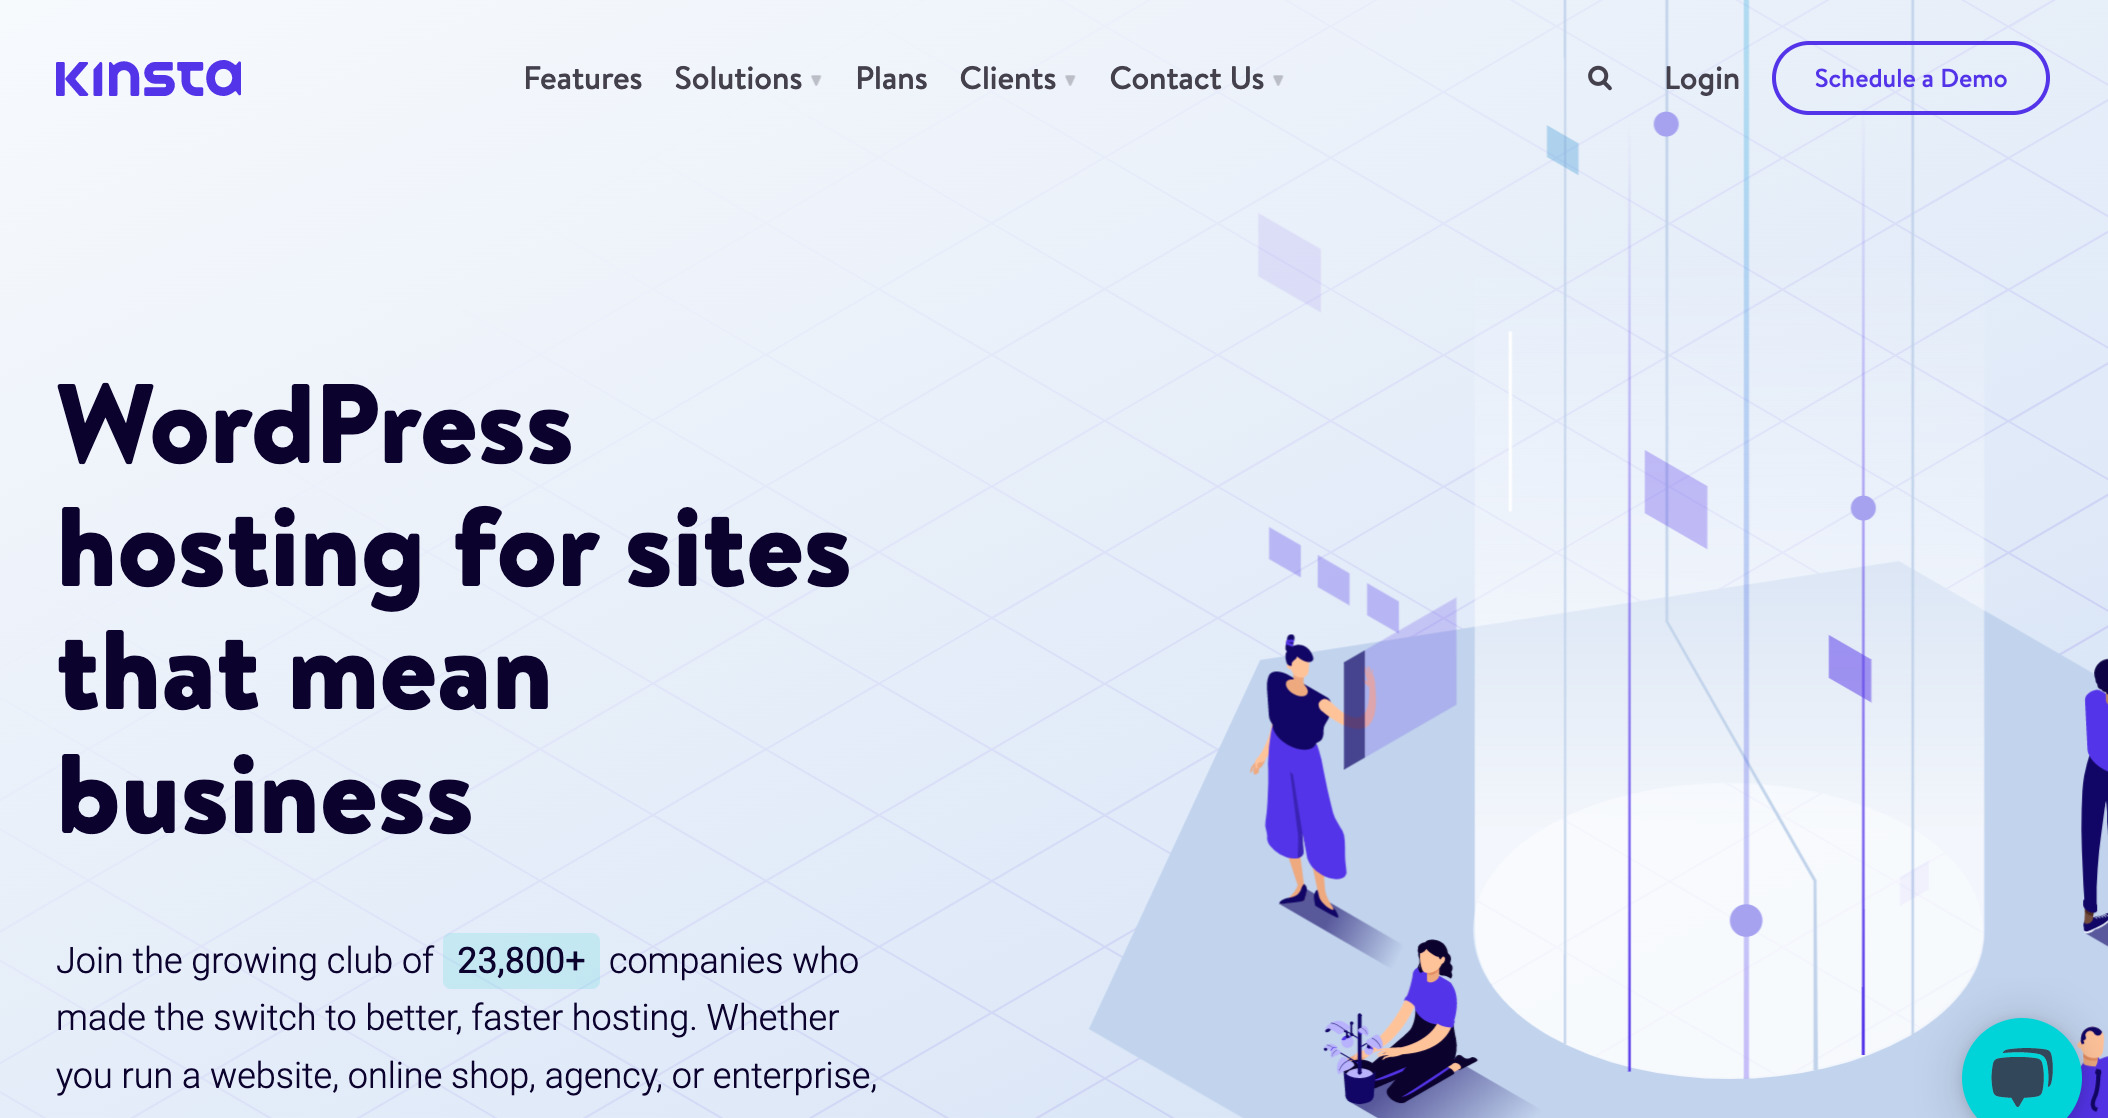 Kinsta is the FASTEST Hosting for Wordpress & usually the BEST Choice